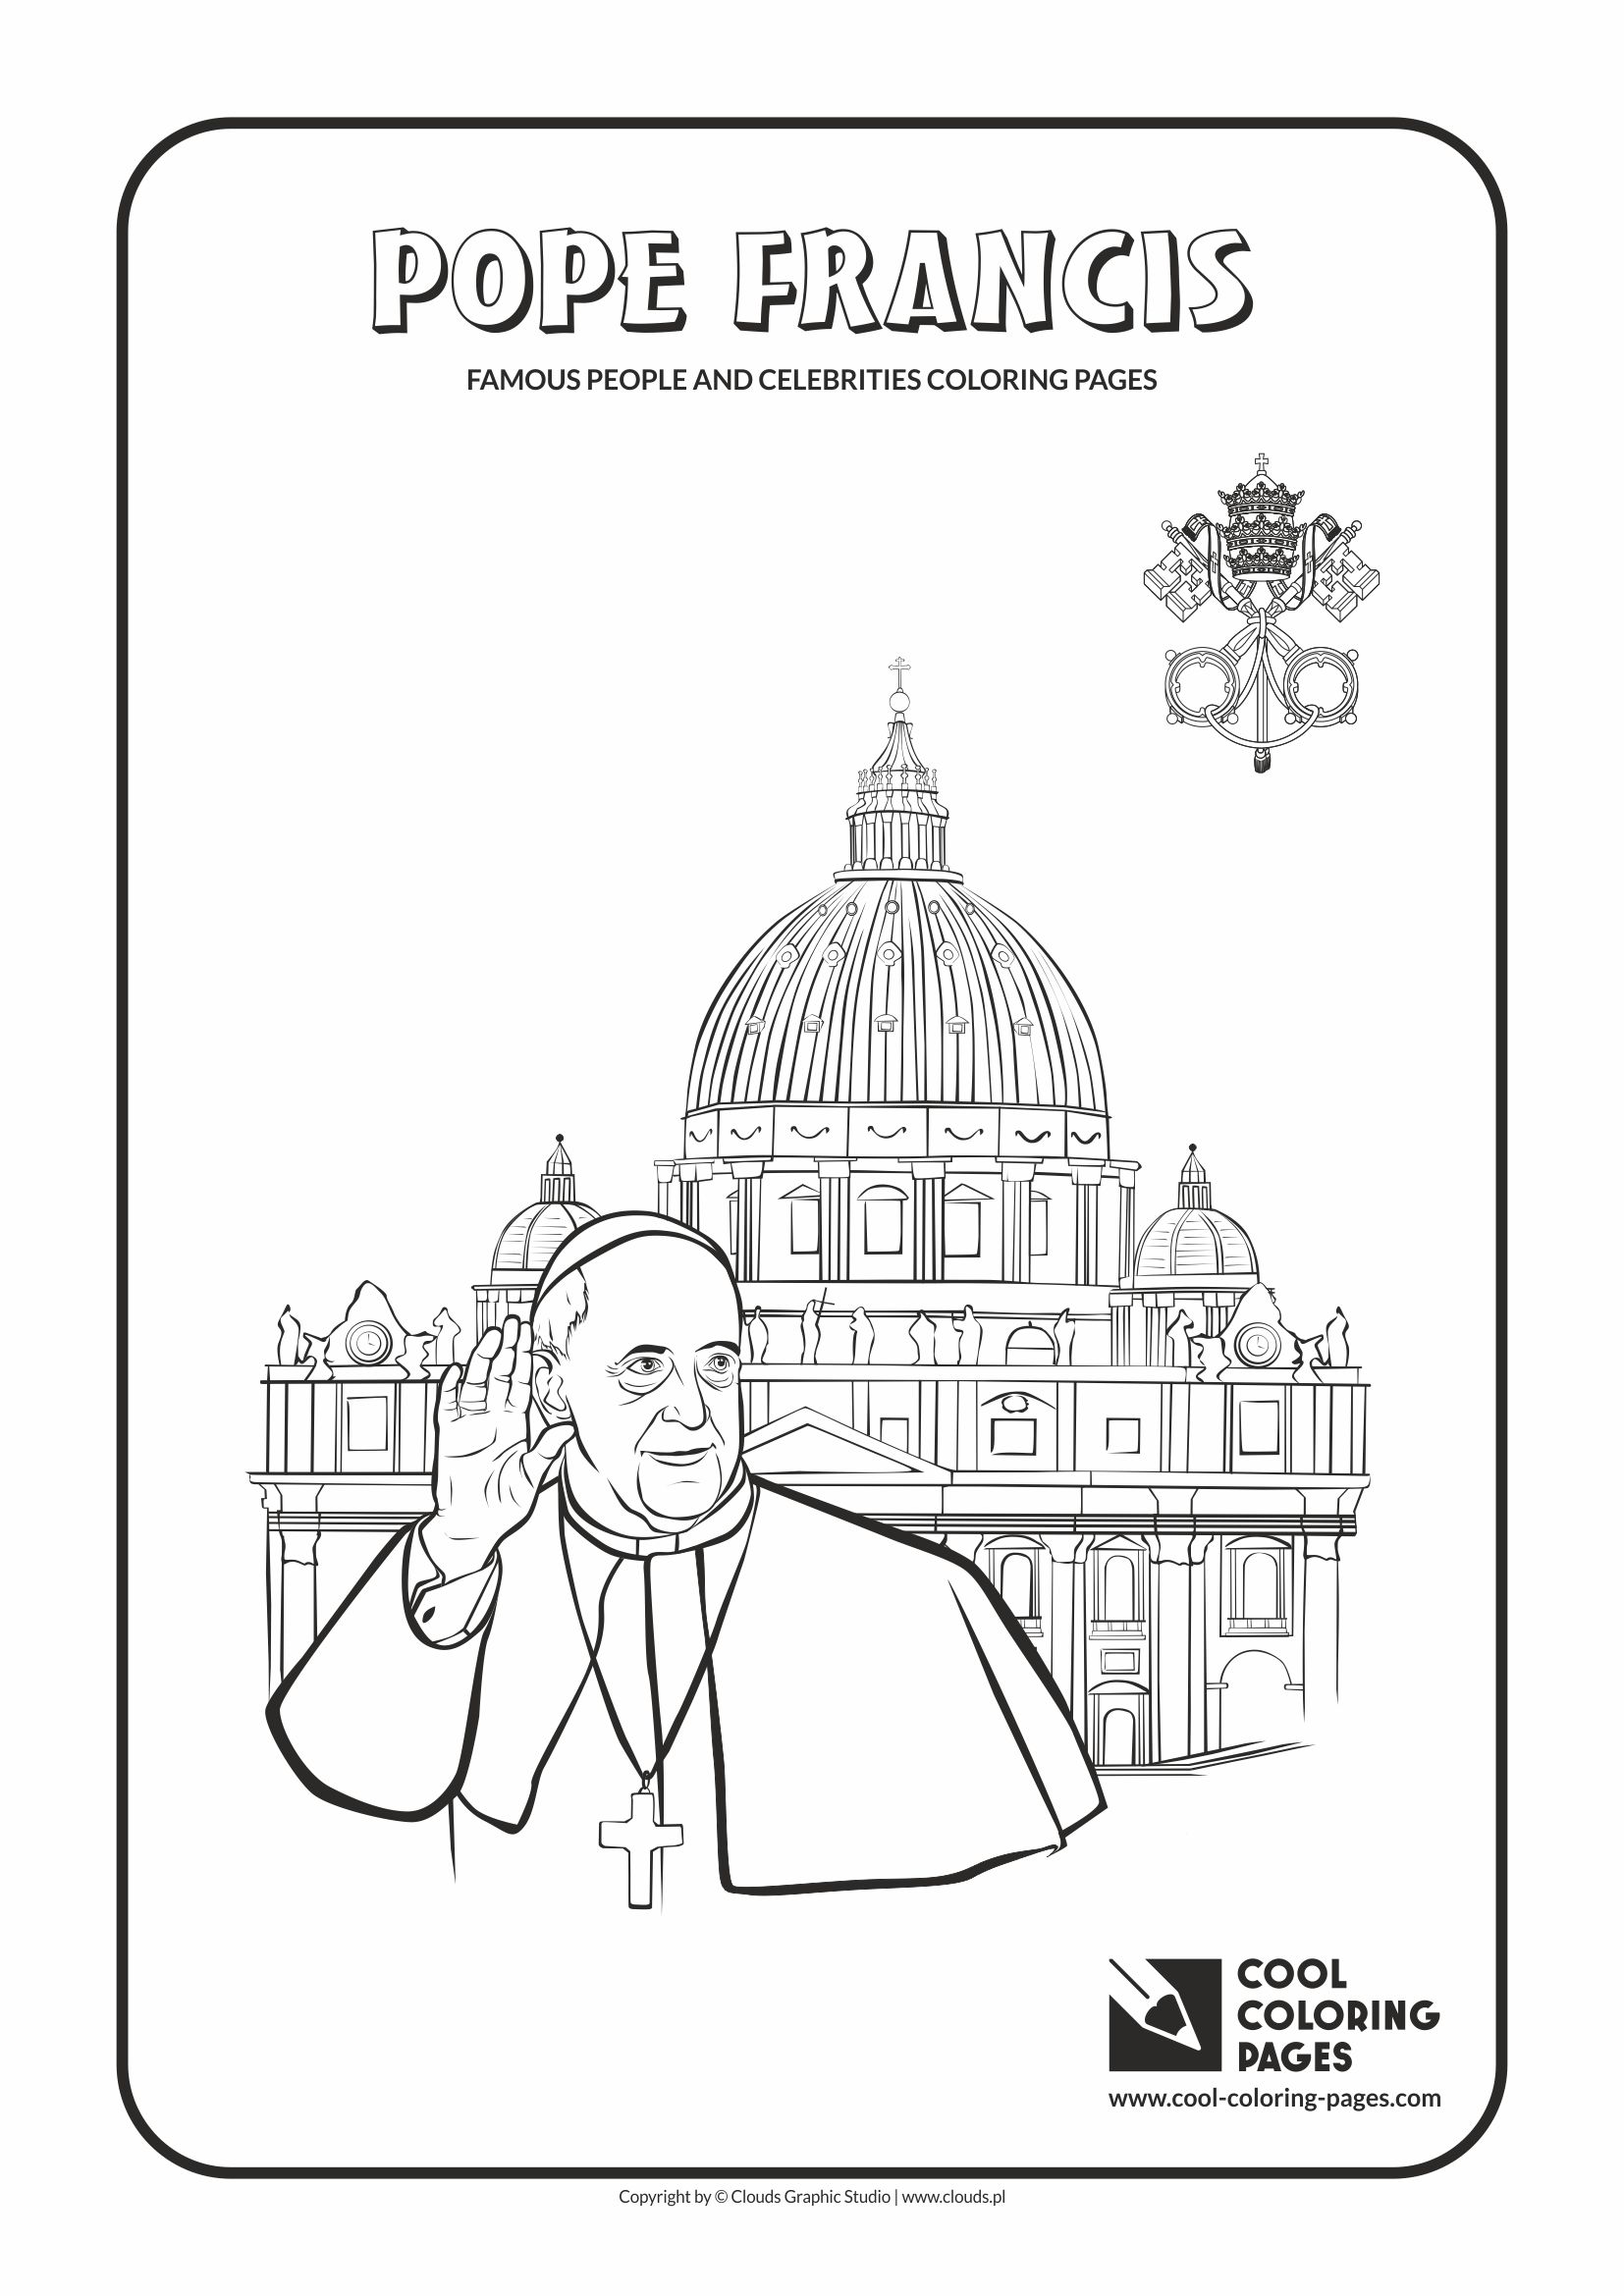 Cool Coloring Pages - Others / Pope Francis / Coloring page with Pope Francis